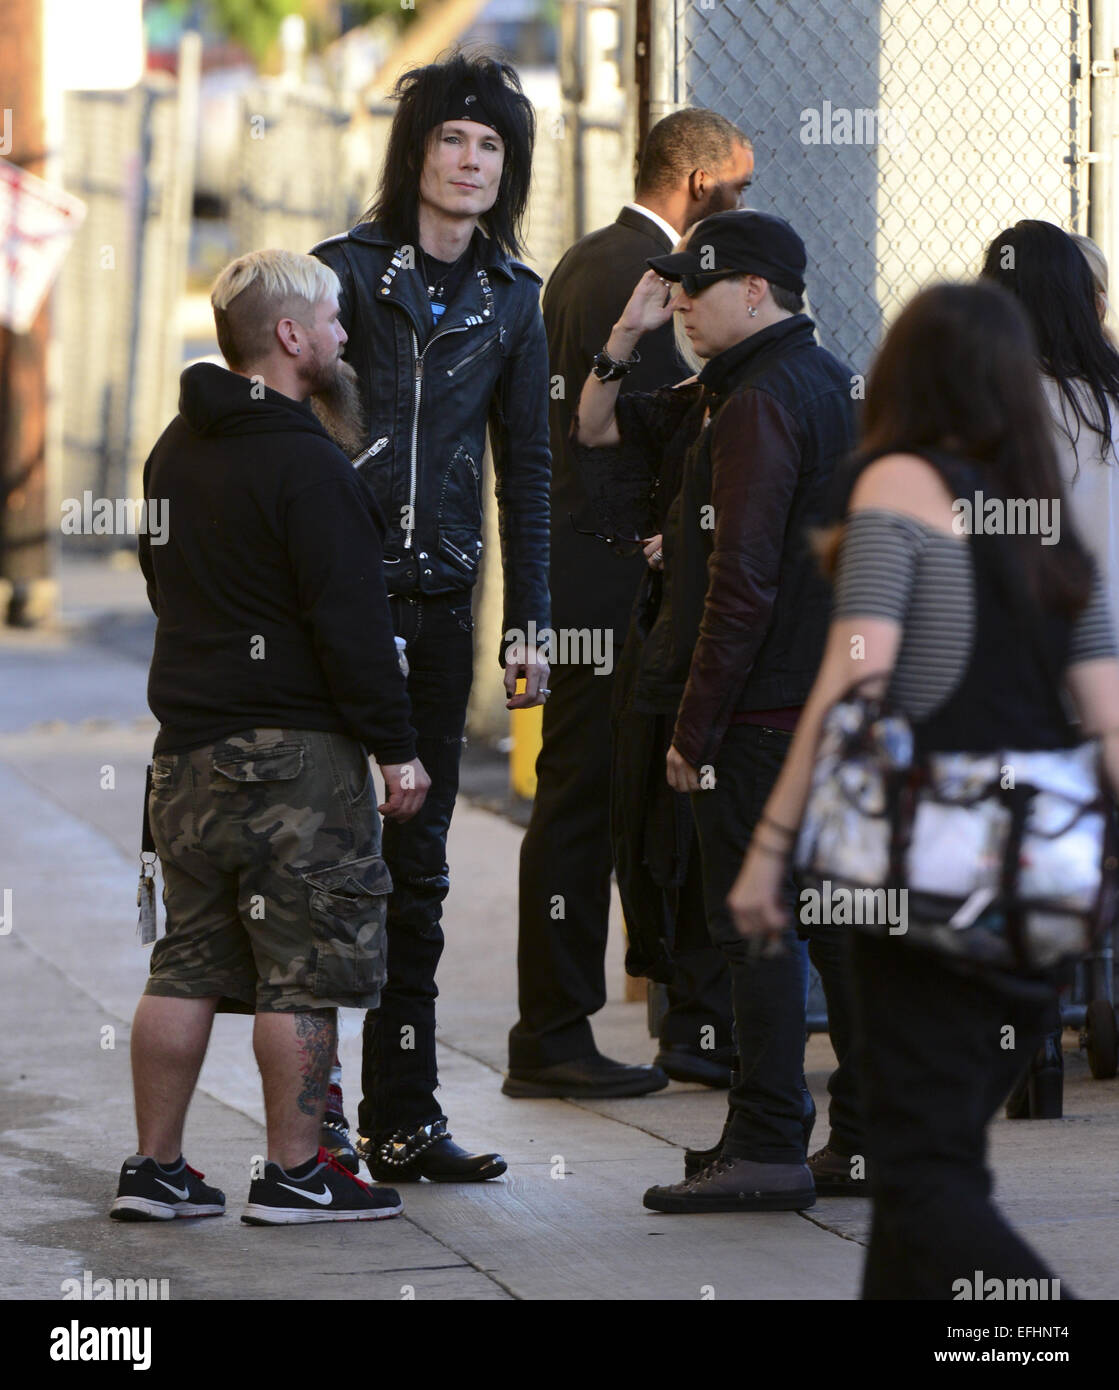 Hollywood, California, USA. 14th Jan, 2015. American musician and bass player for Los Angeles based heavy metal band, L.A. Guns, Kenny Kweens, meets up with friends in an alley behind Hollywood Blvd. in Hollywood on Wednesday, January 14, 2015. © David Bro/ZUMA Wire/Alamy Live News Stock Photo